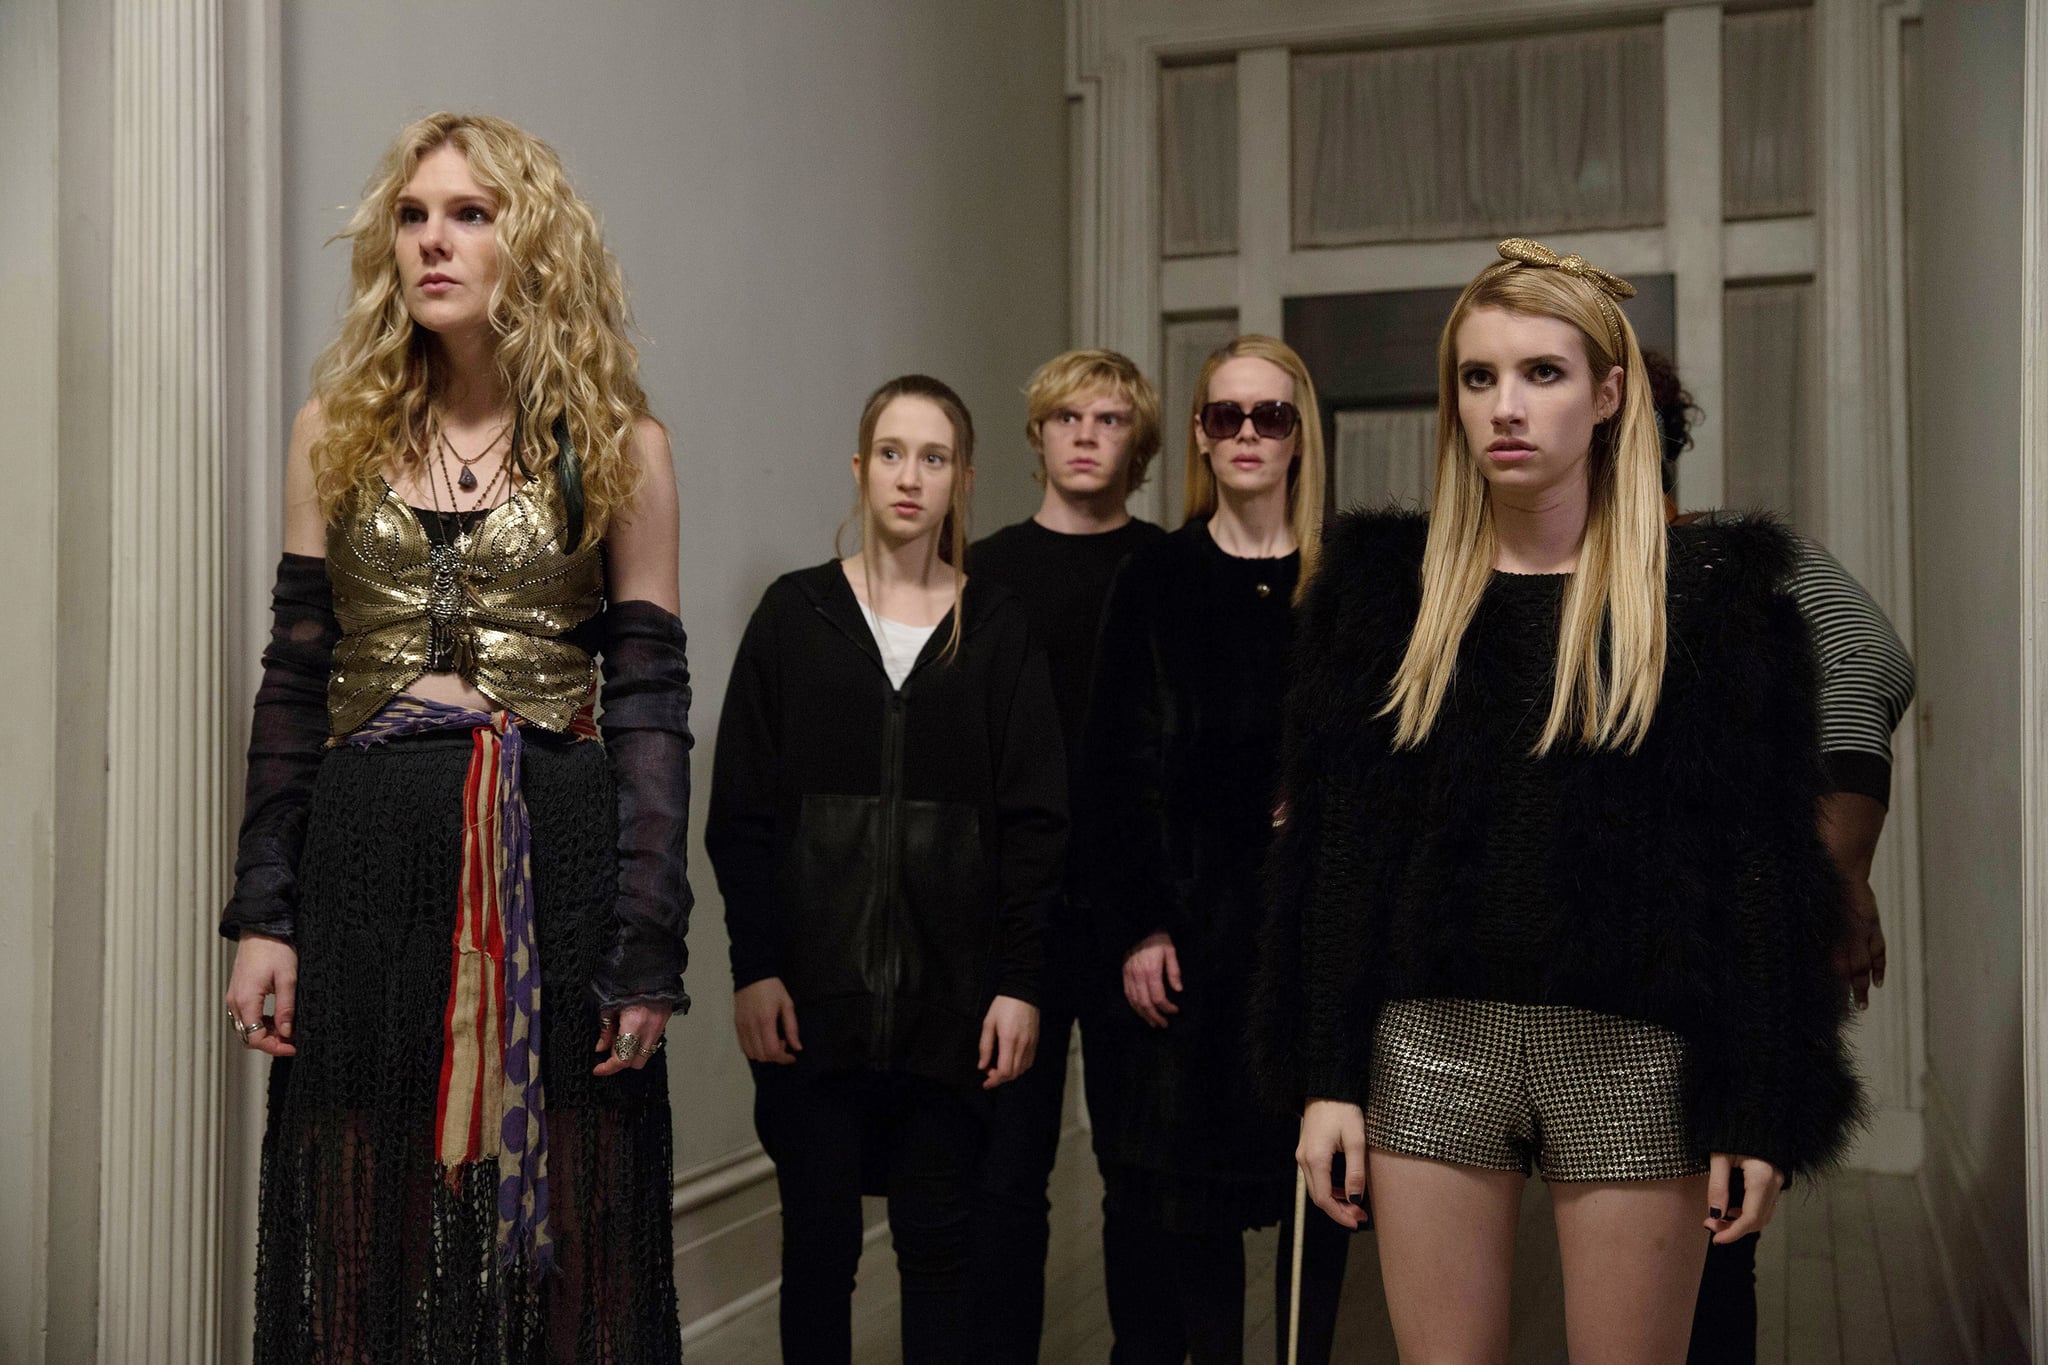 AMERICAN HORROR STORY: COVEN, l-r: Lily Rabe, Taissa Farmiga, Evan Peters, Sarah Paulson, Emma Roberts in 'Go To Hell' (Season 3, Episode 12, aired January 22, 2014). ph: Michele K. Short/FX Networks/courtesy Everett Collection